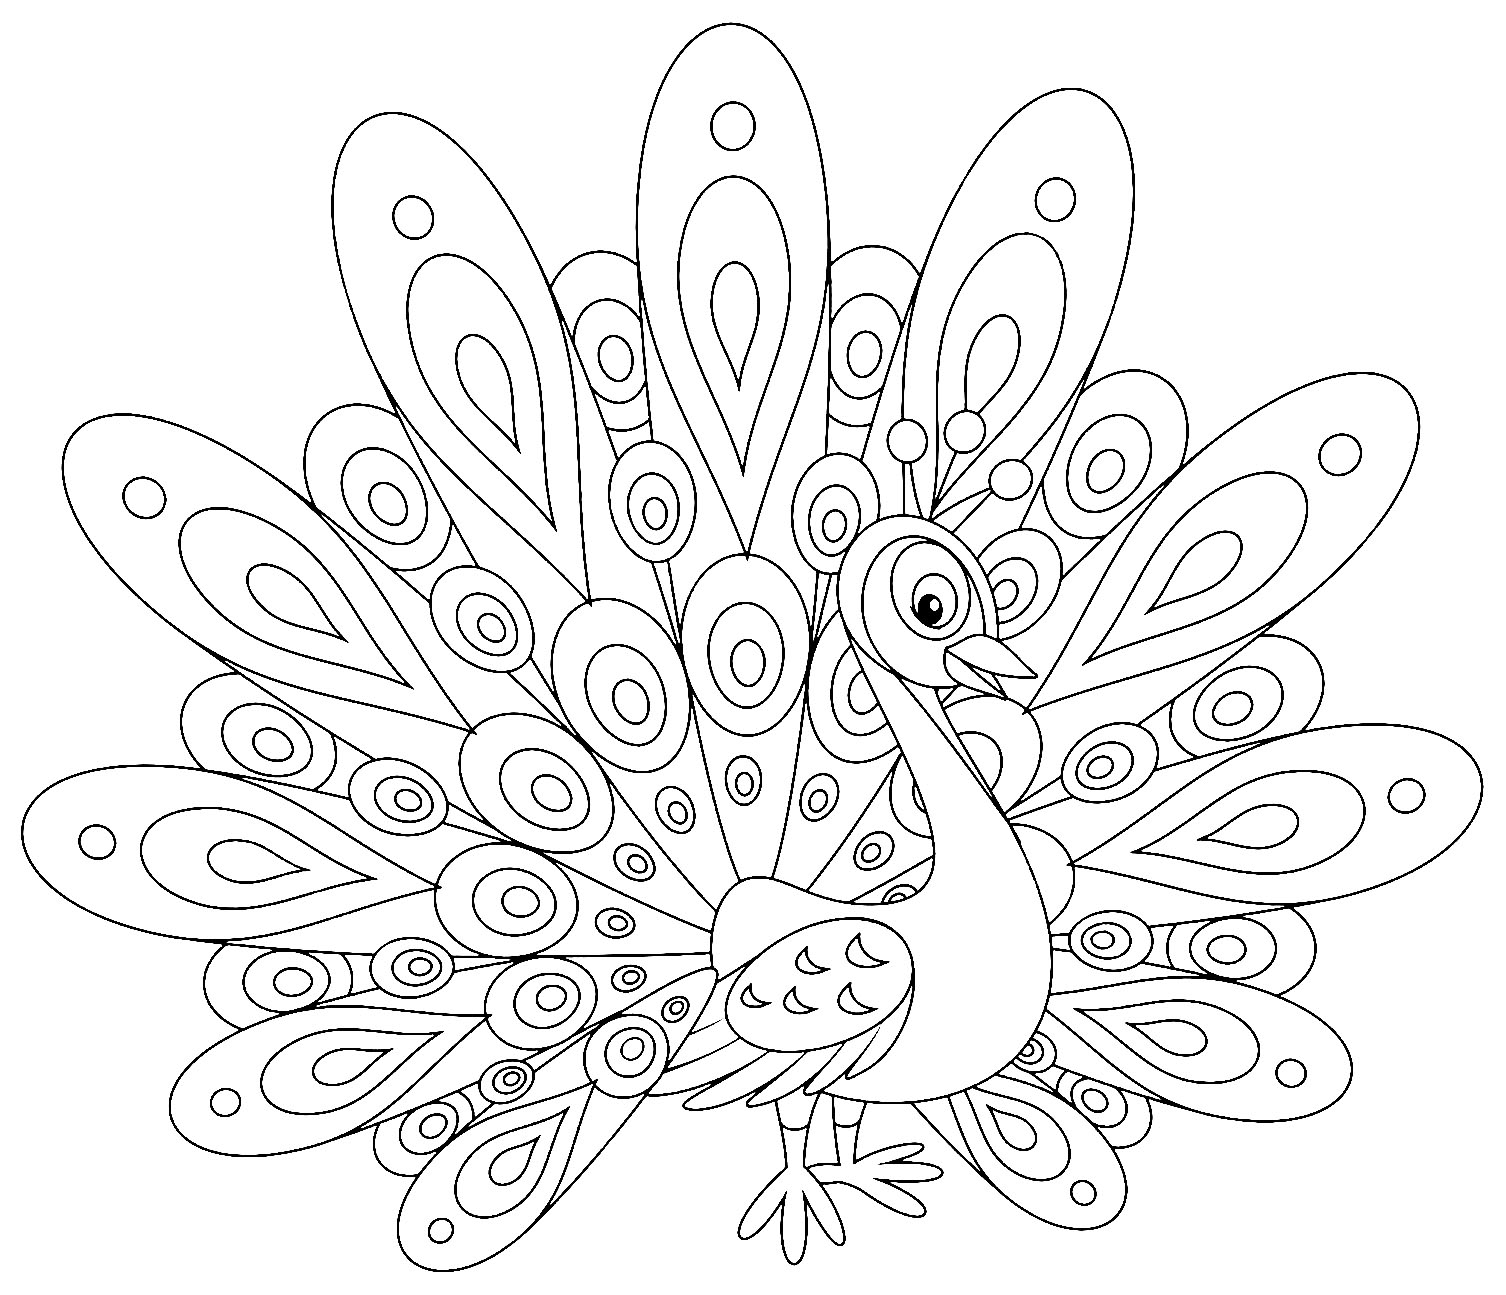 peacock-coloring-pages-for-children-peacocks-kids-coloring-pages